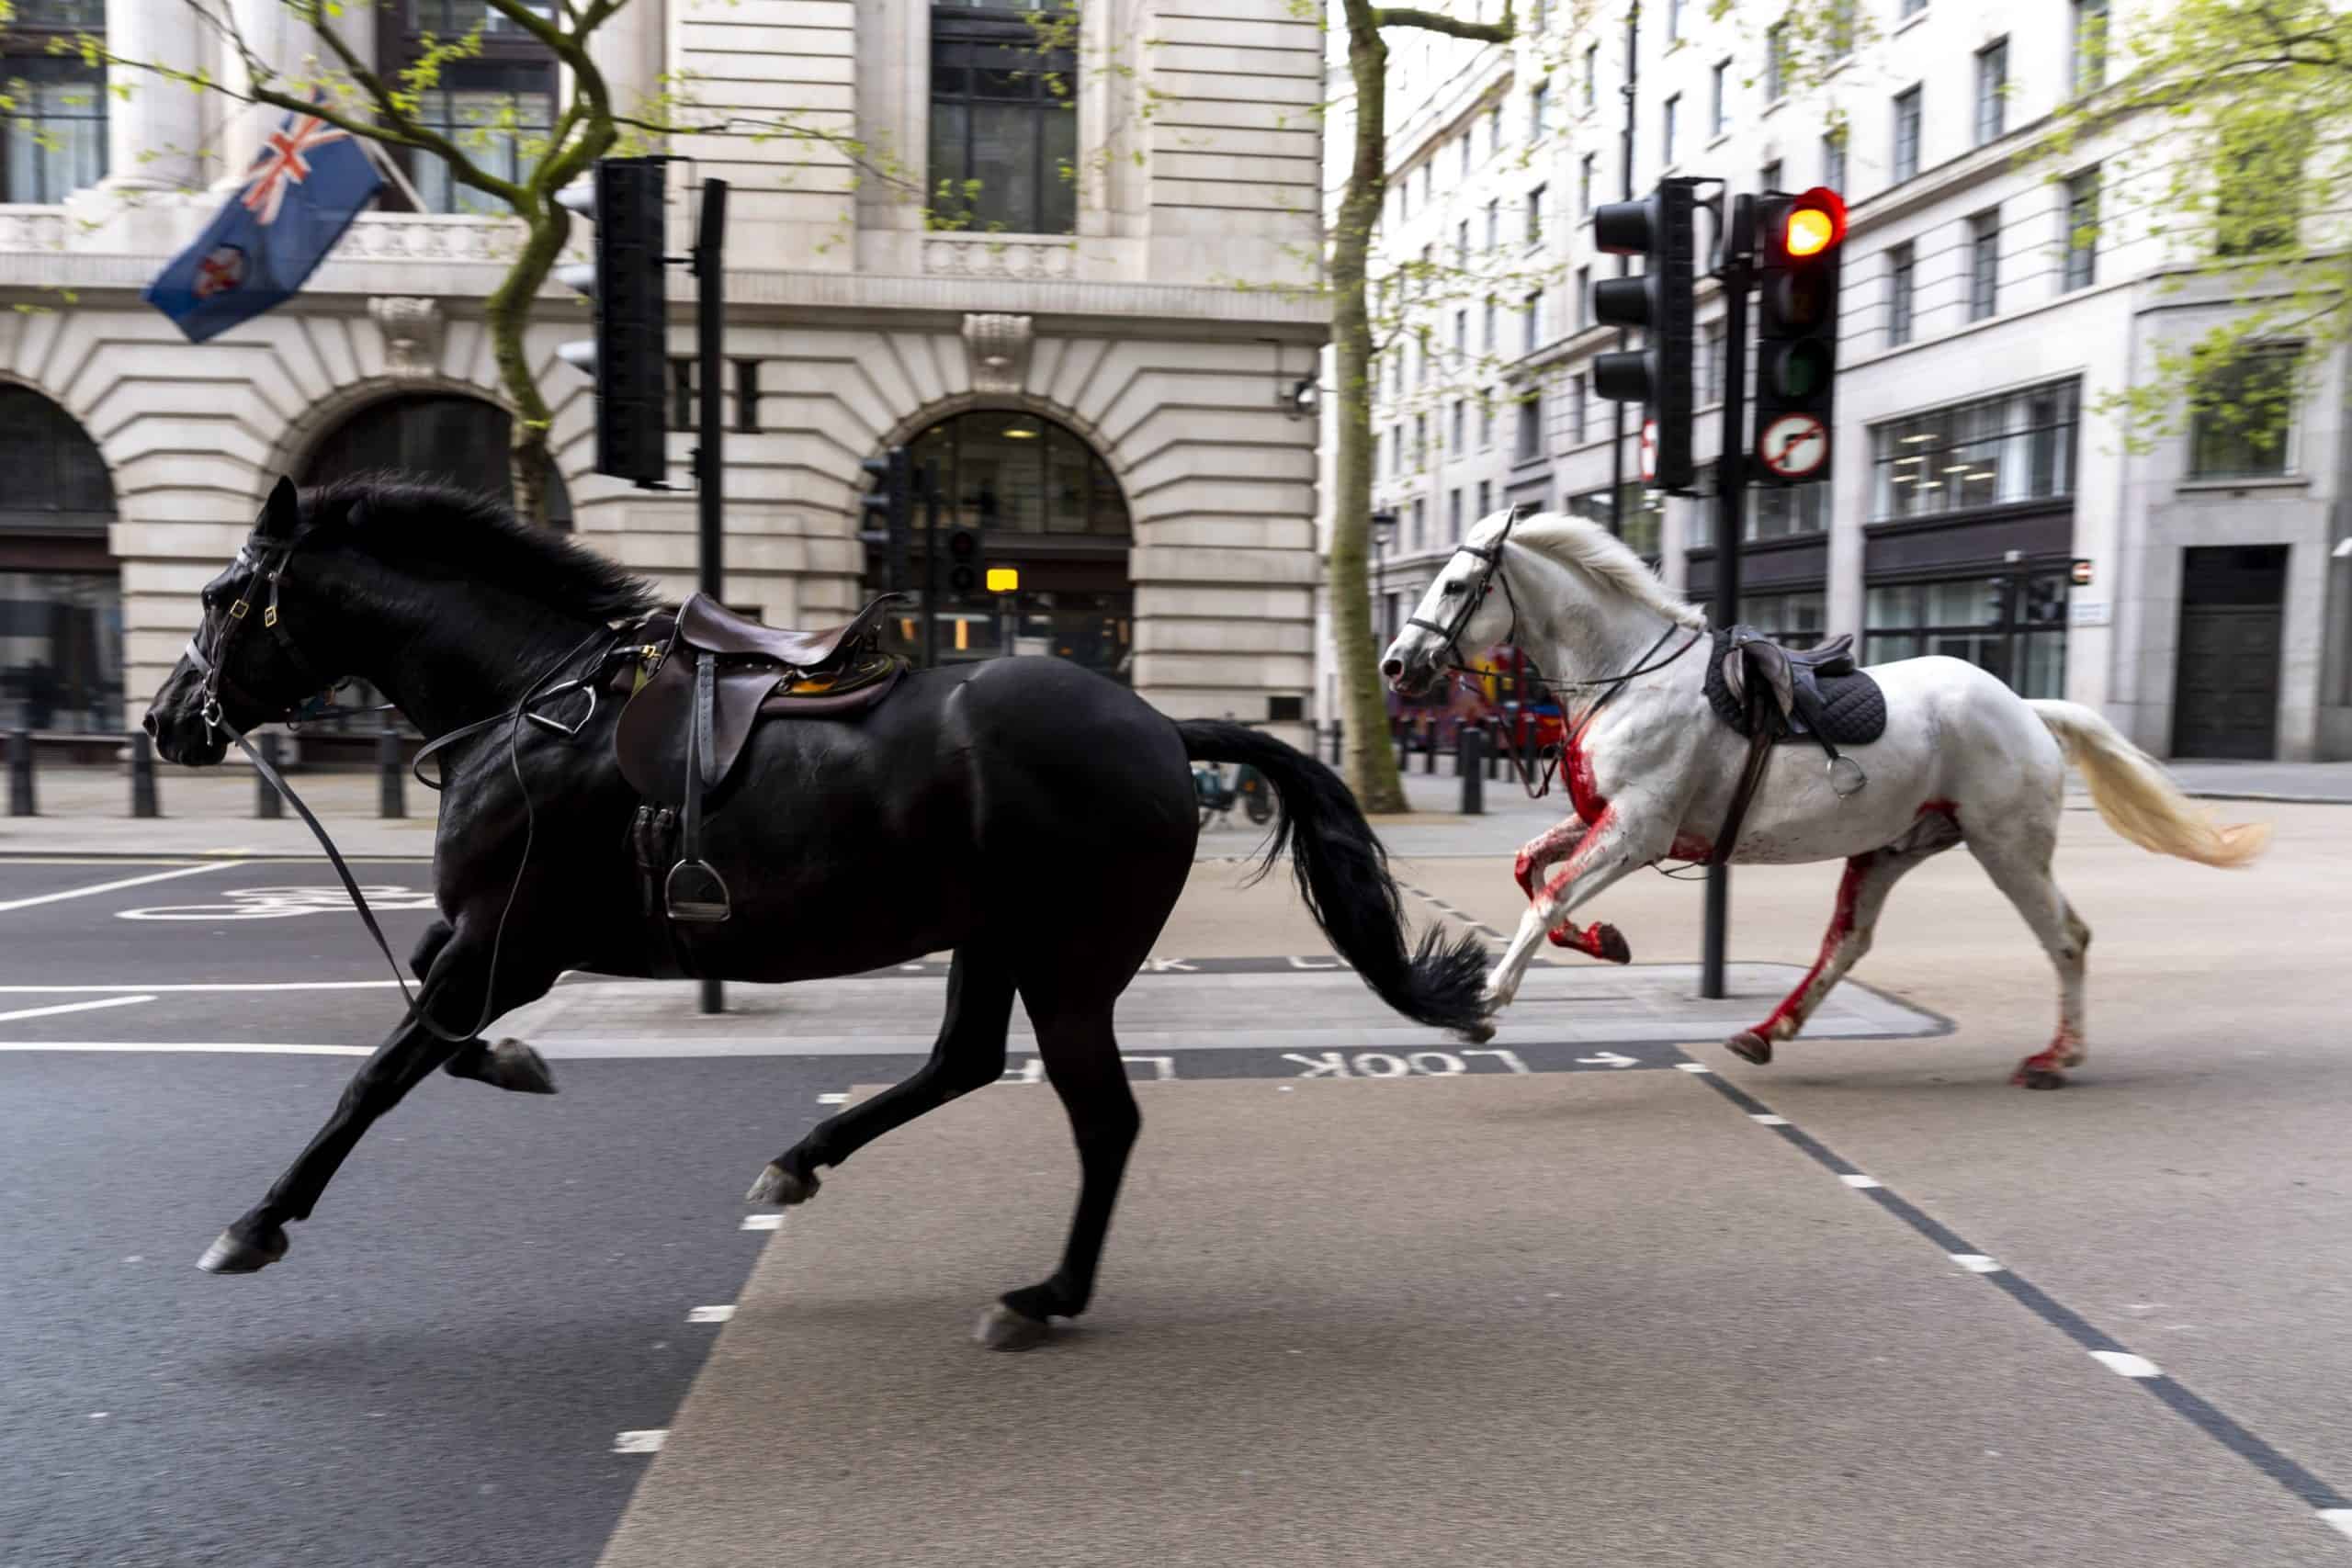 Taxis smashed and people hospitalised as blood-soaked horses bolt through central London